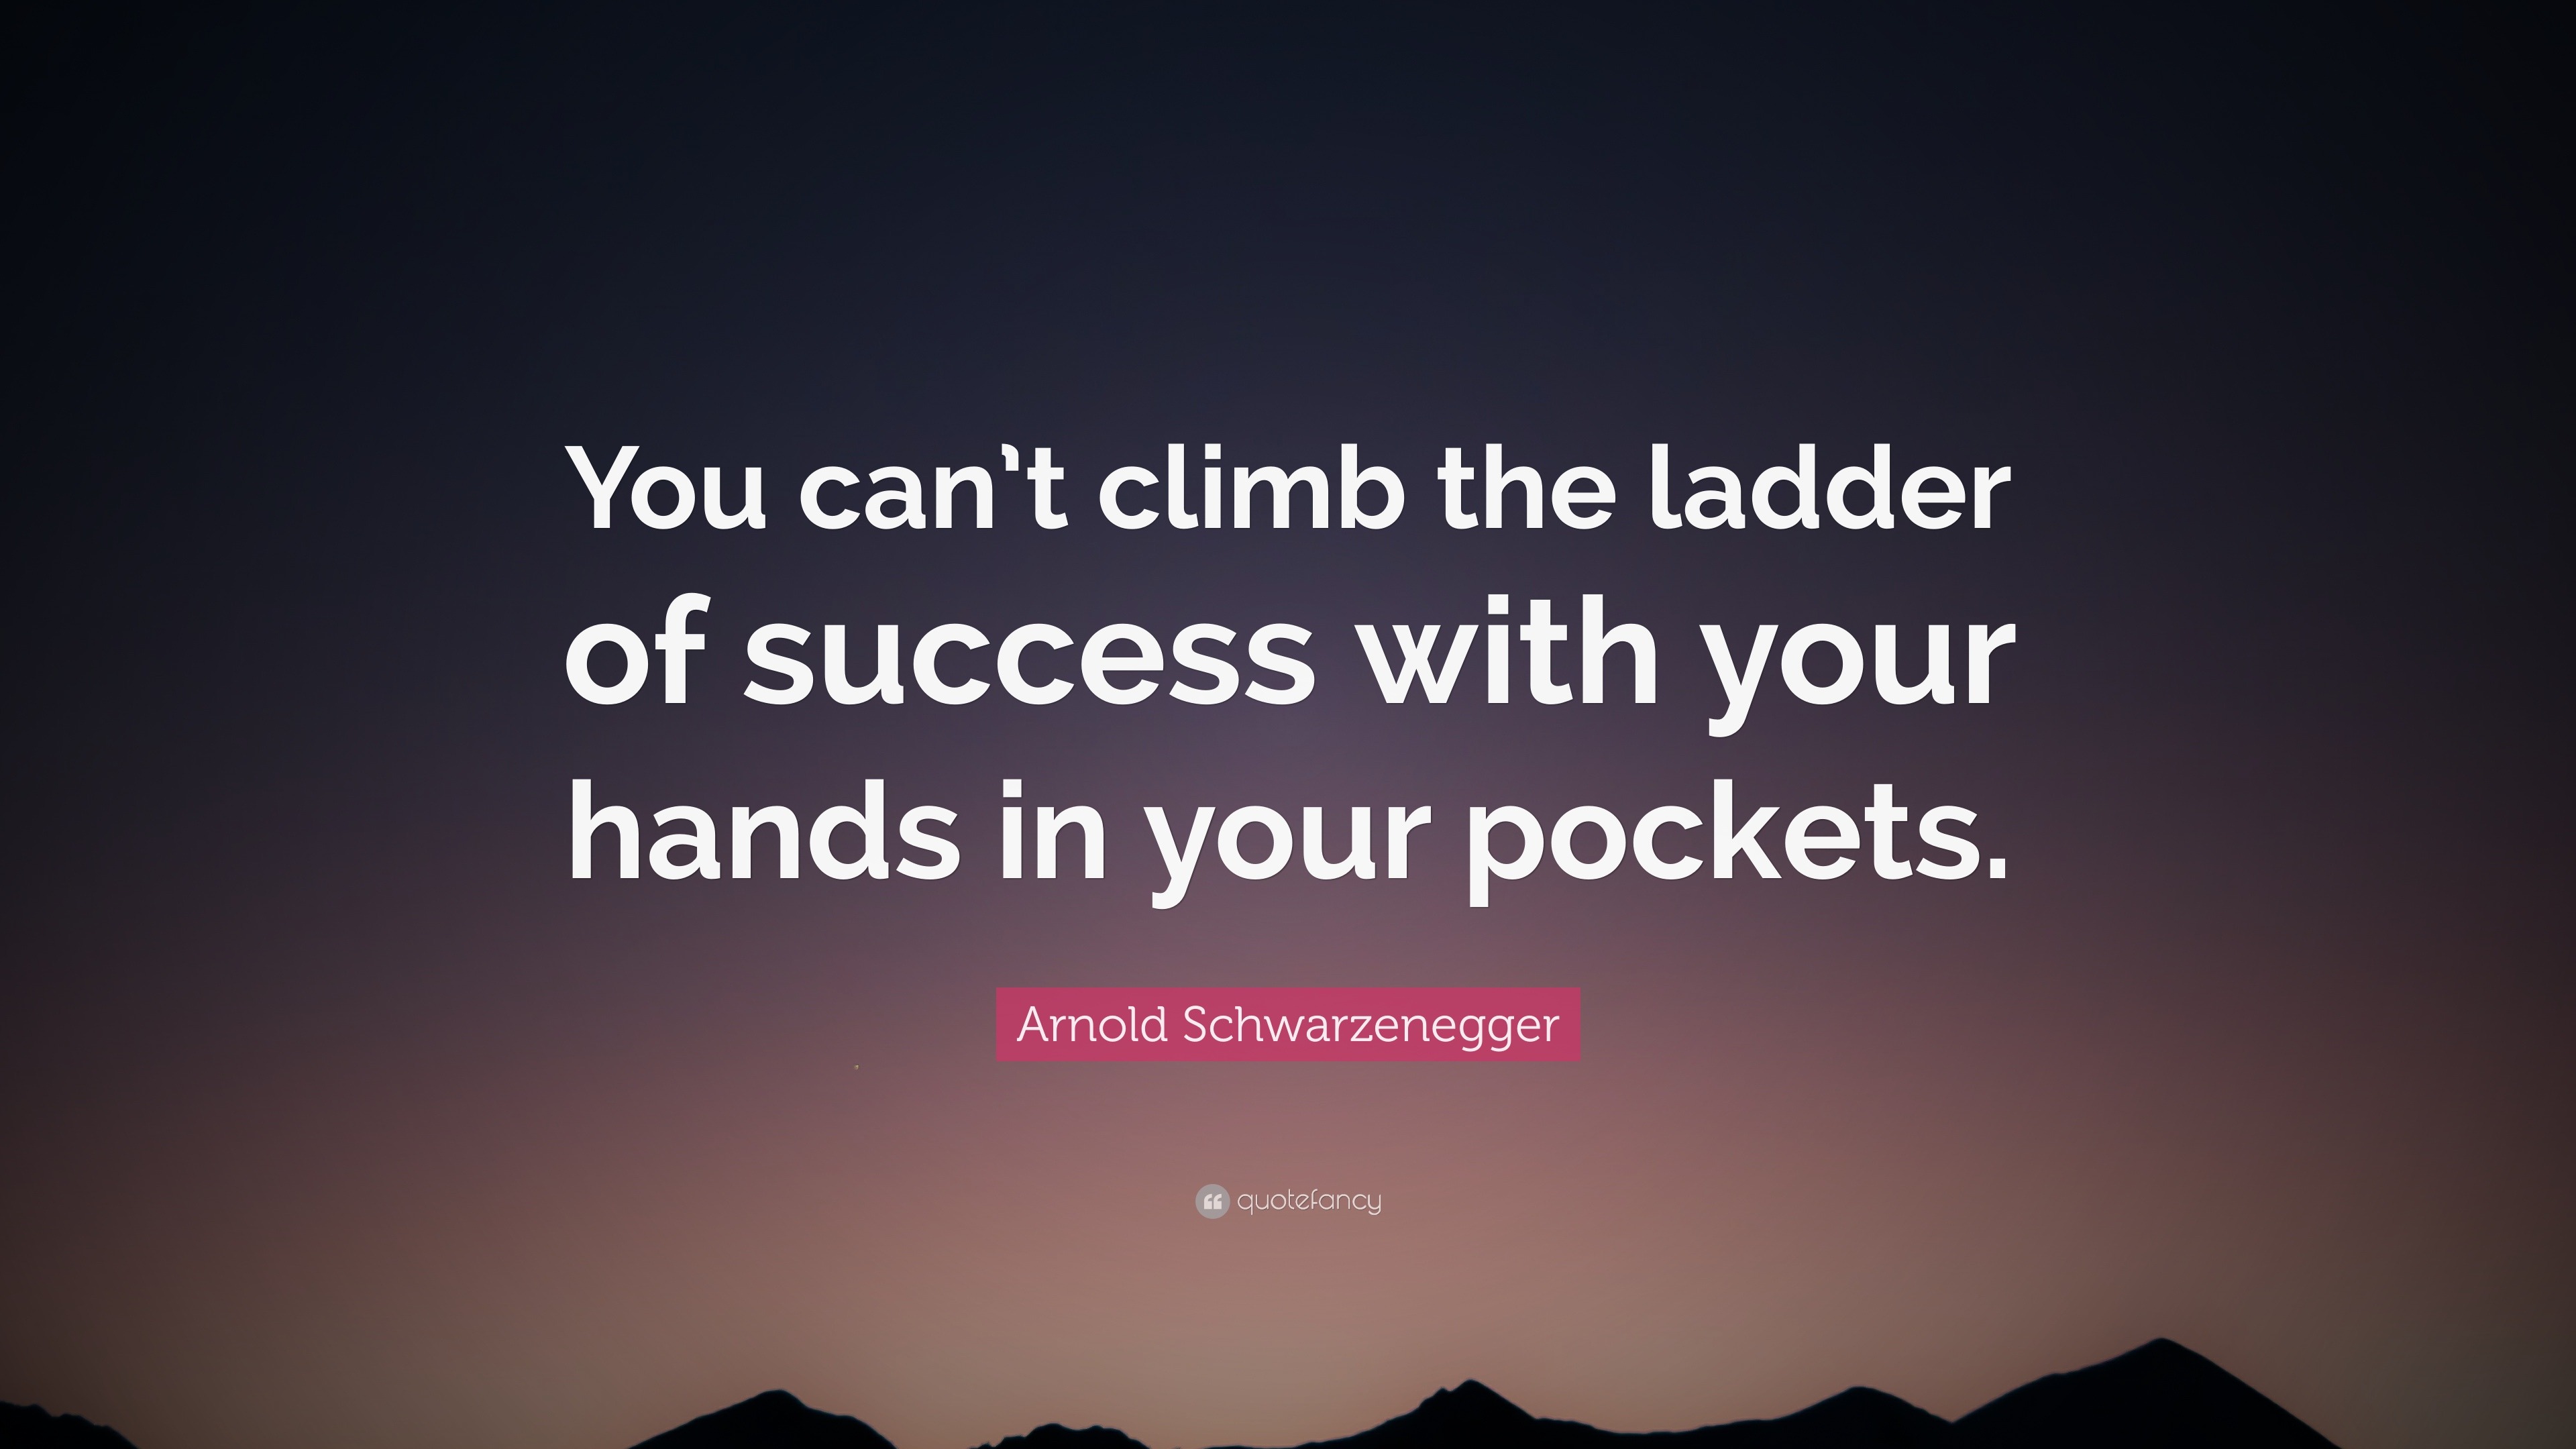 Arnold Schwarzenegger Quote: “You can’t climb the ladder of success ...